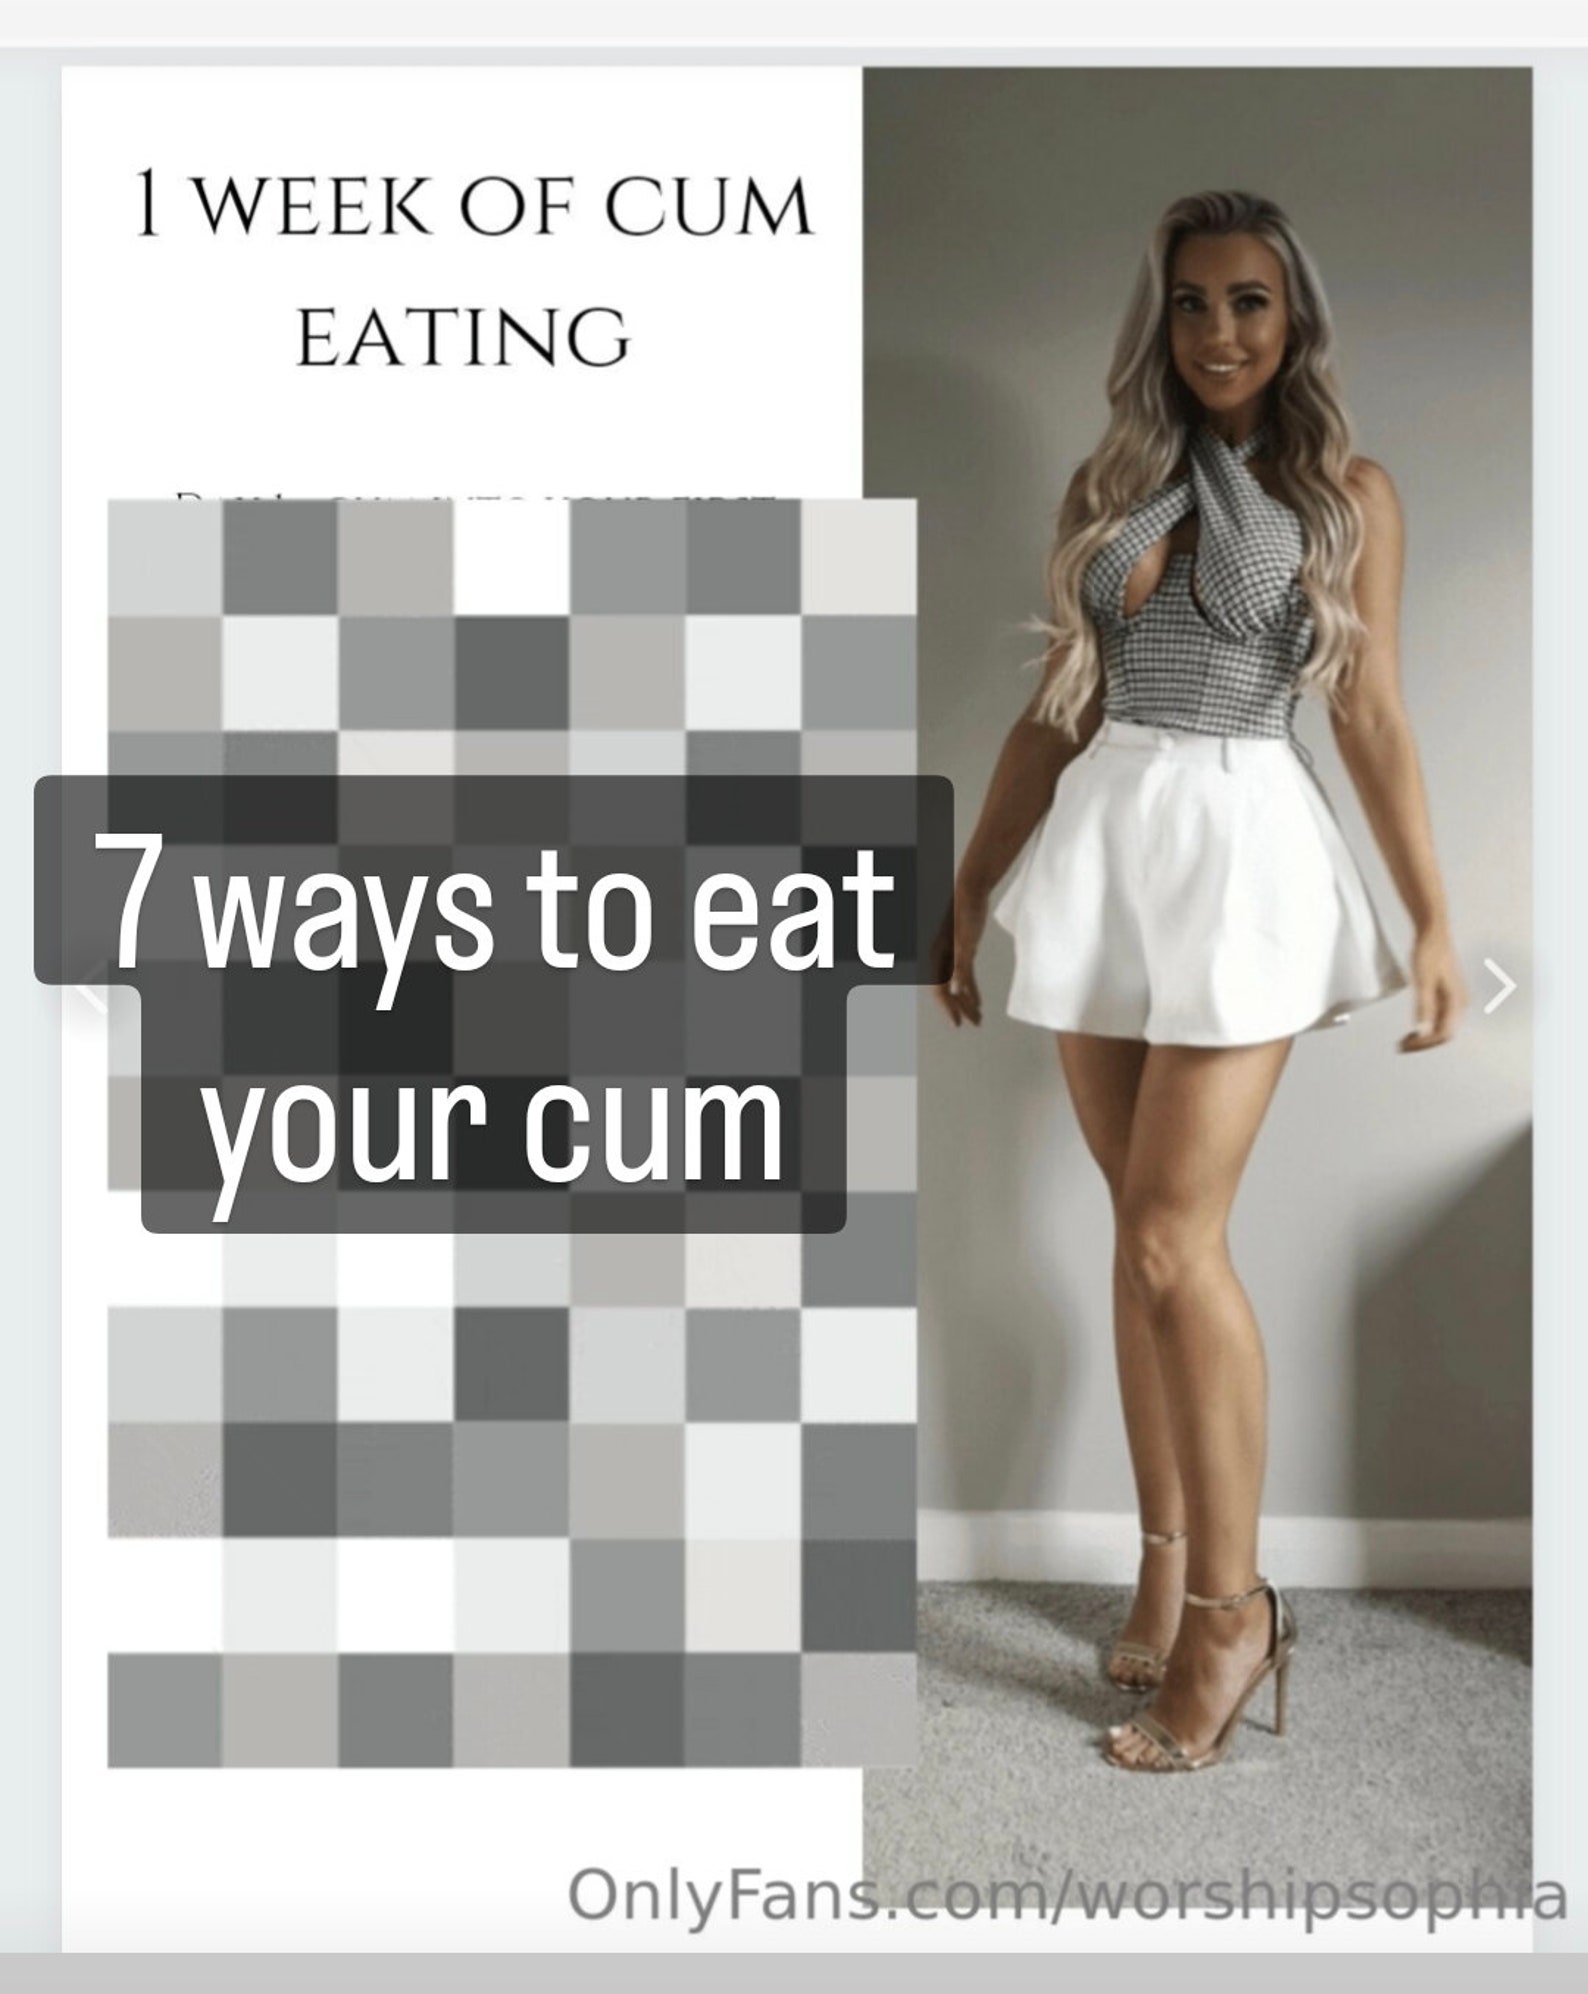 7 Ways To Eat Your Cum Mistress Sophia Has A Full Week Of Femdom Cei Tasks For You To Complete